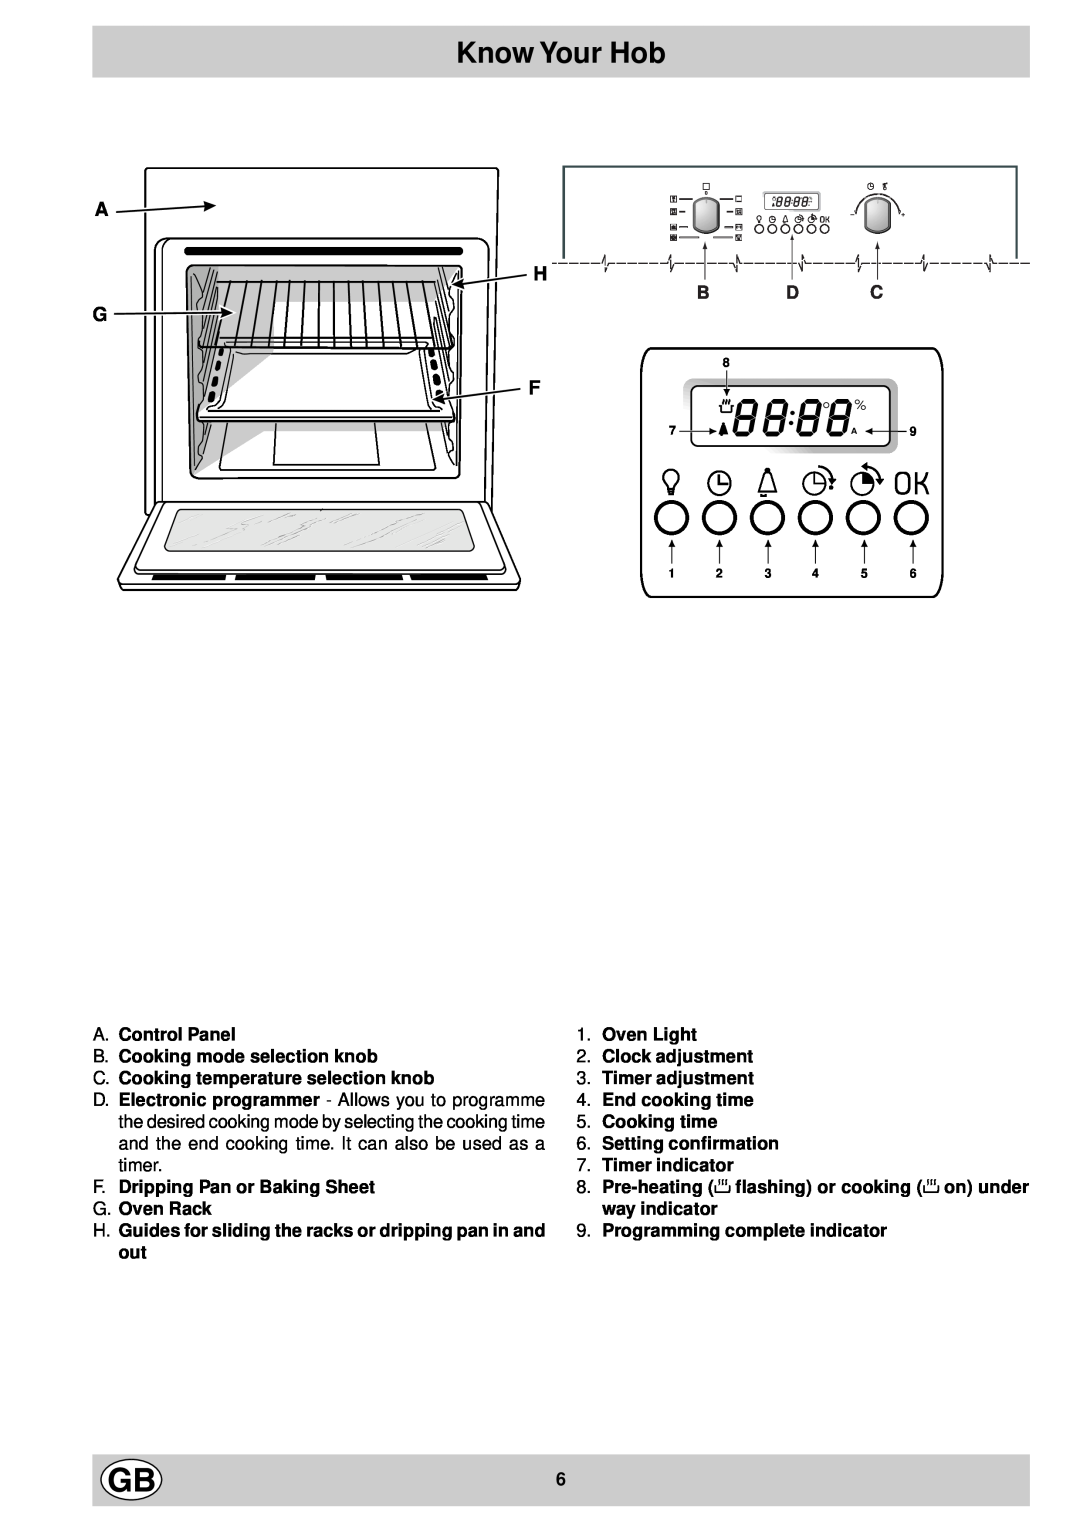 Hotpoint SD97E Know Your Hob, A H G F, A.Control Panel B.Cooking mode selection knob, C.Cooking temperature selection knob 